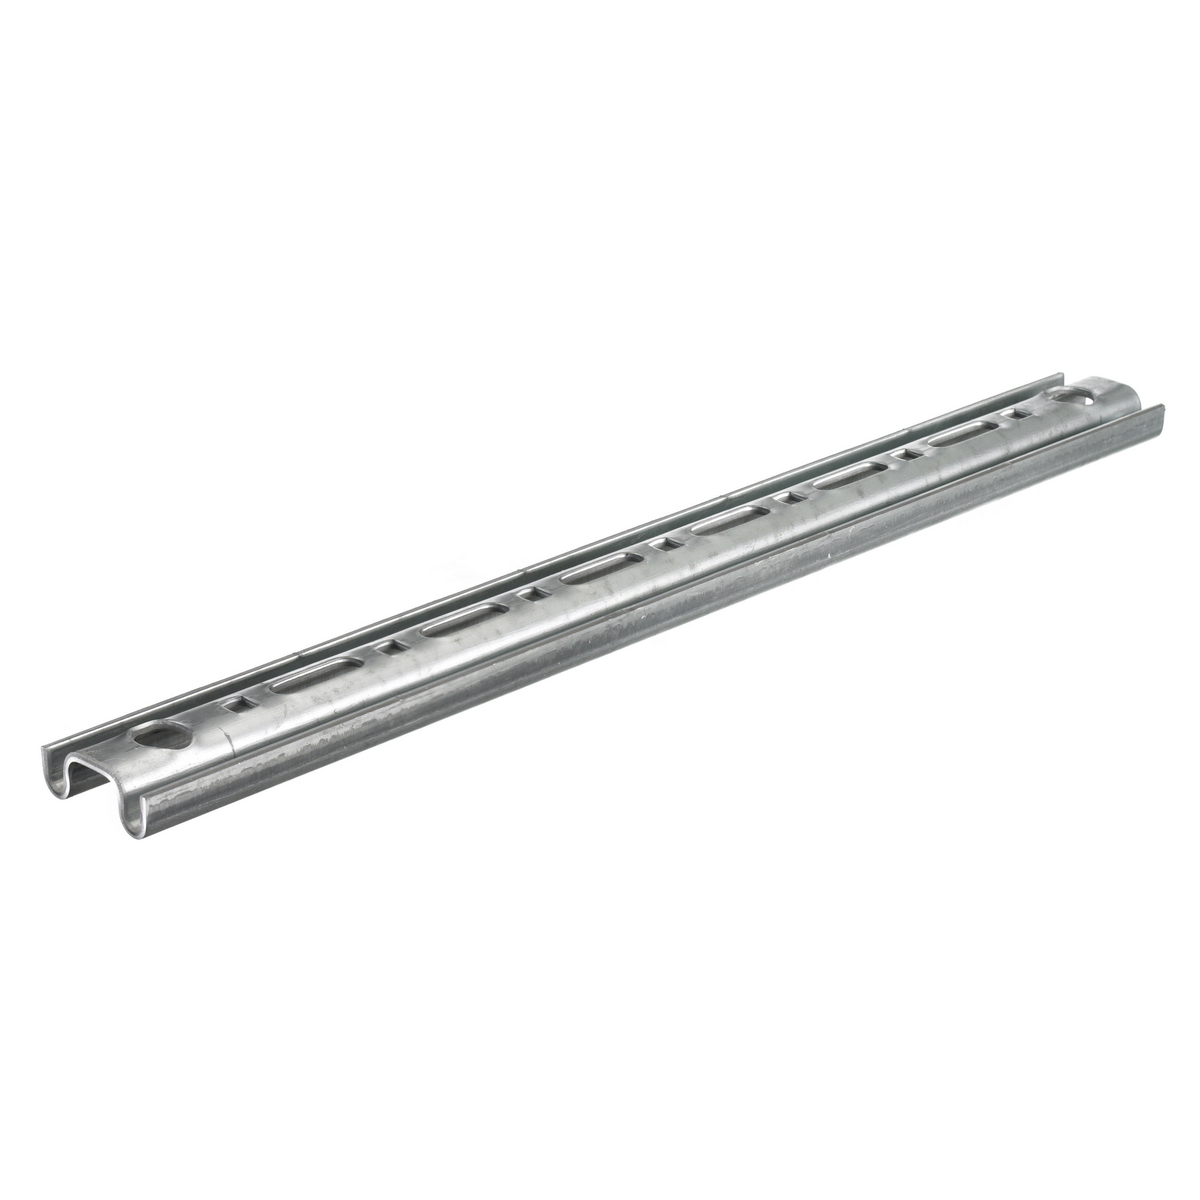 WB,ACCS,CEILINGSUPPORT,18"TRAY,PREGALV